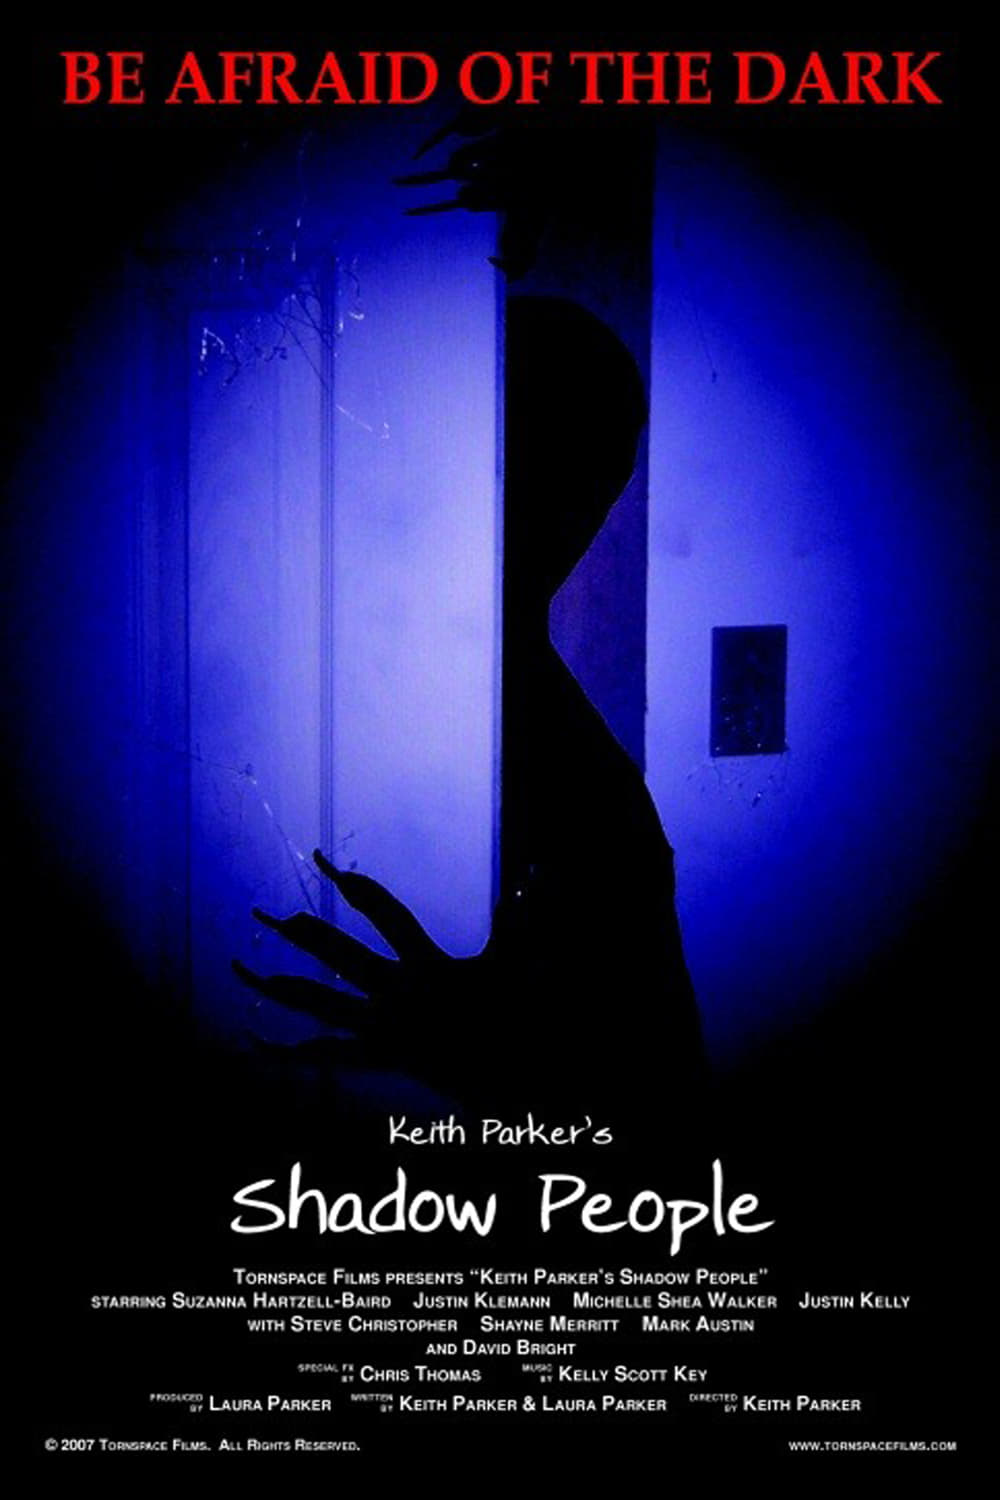 Keith Parker's Shadow People